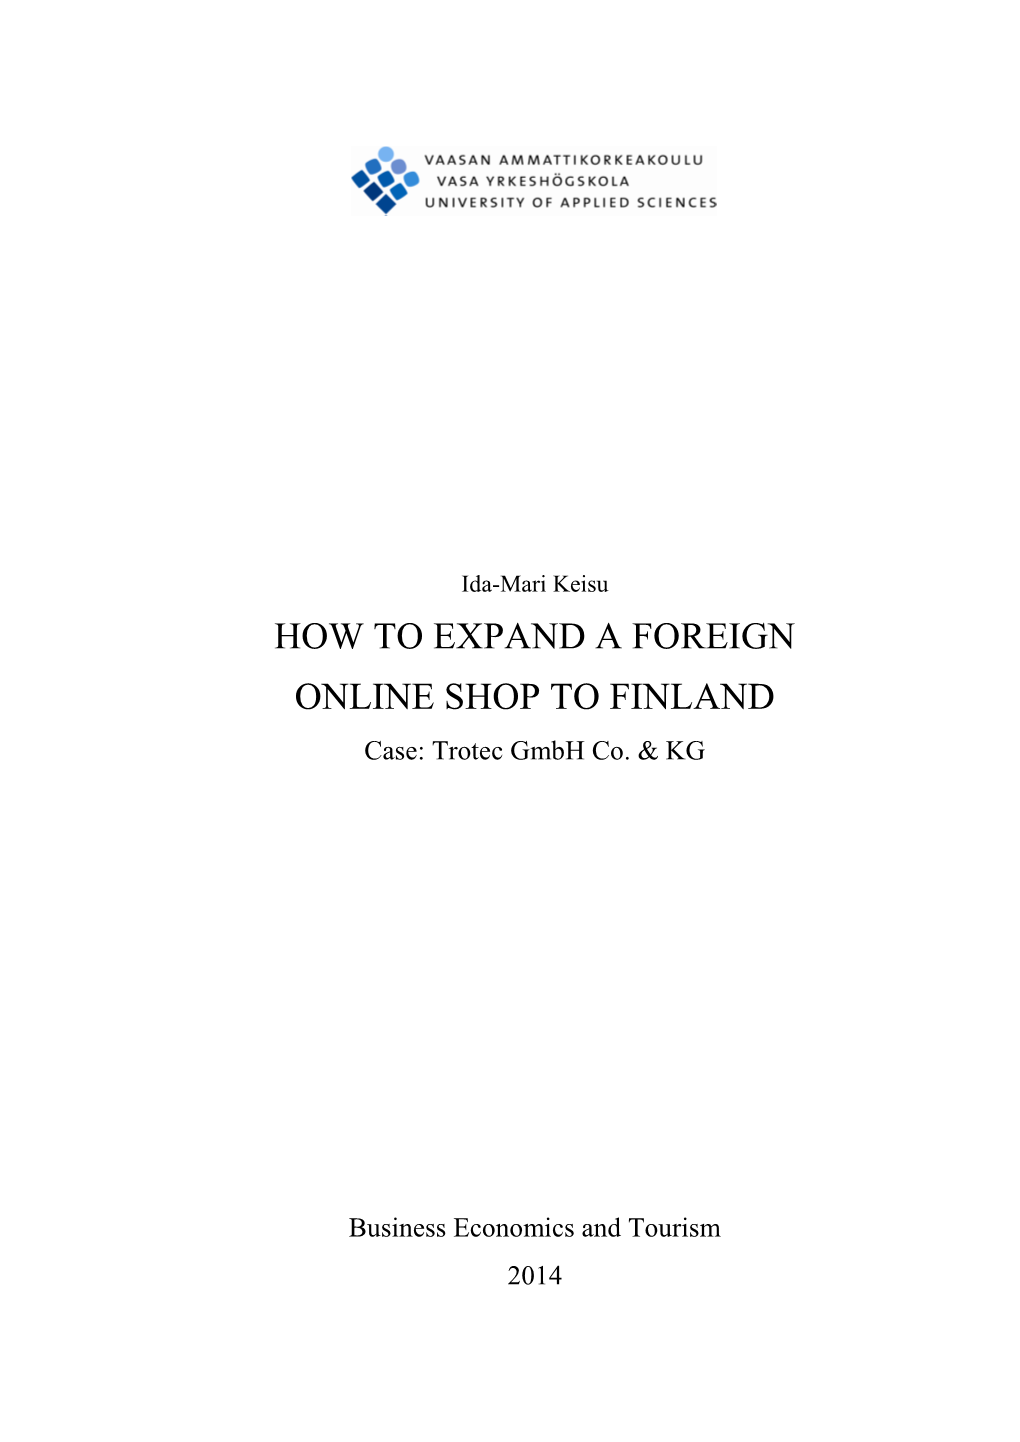 HOW to EXPAND a FOREIGN ONLINE SHOP to FINLAND Case: Trotec Gmbh Co